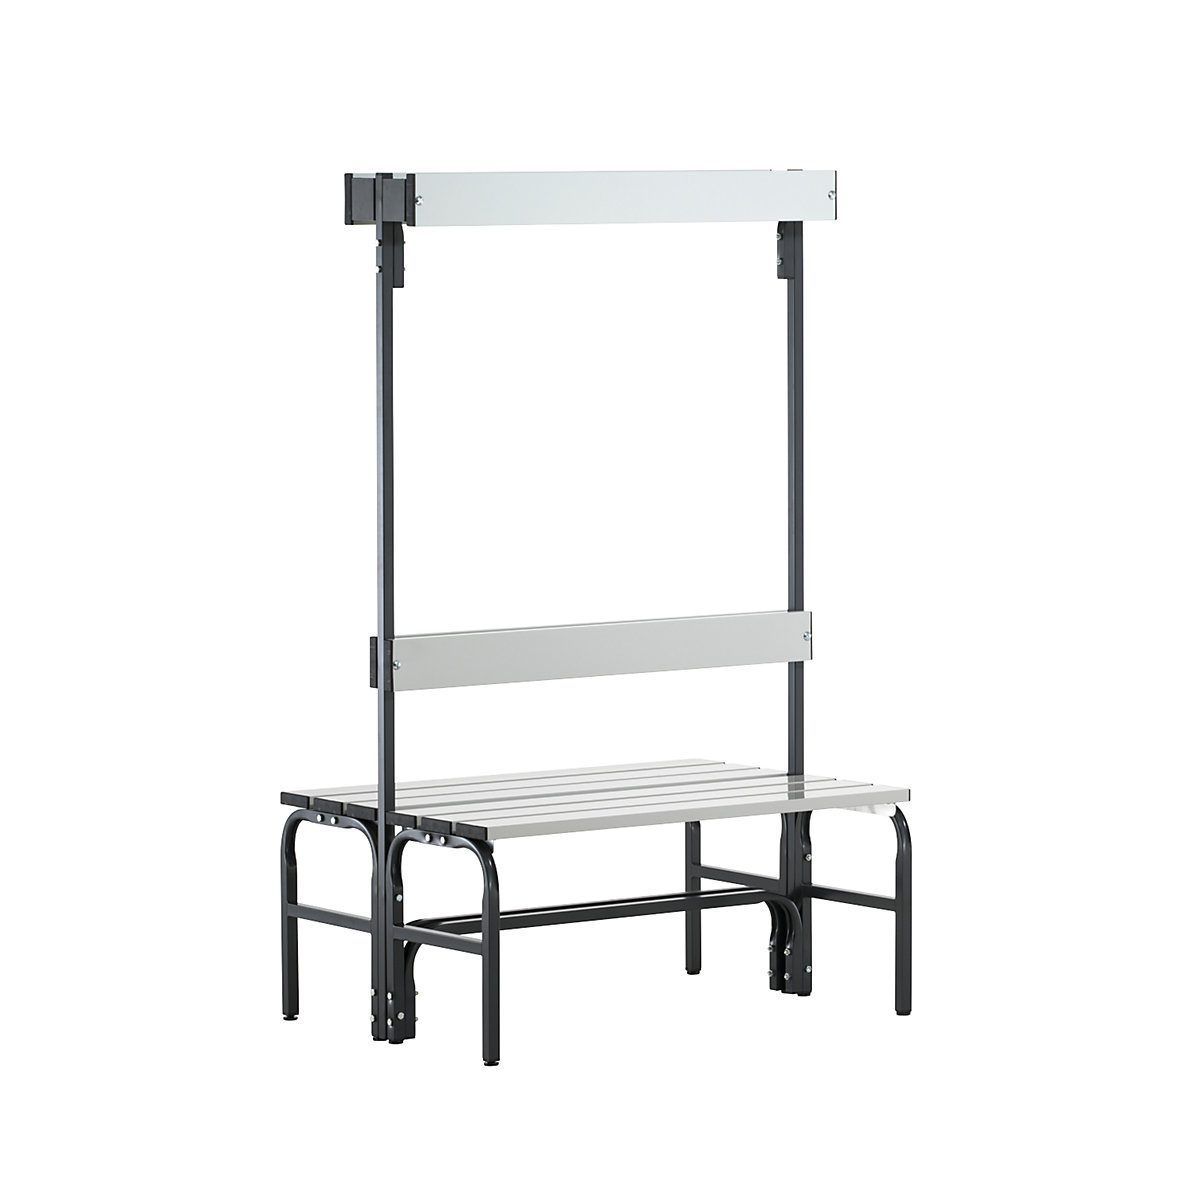 Sypro – Changing room bench made of stainless steel, HxD 1650 x 725 mm, length 1015 mm, 6 hooks, charcoal